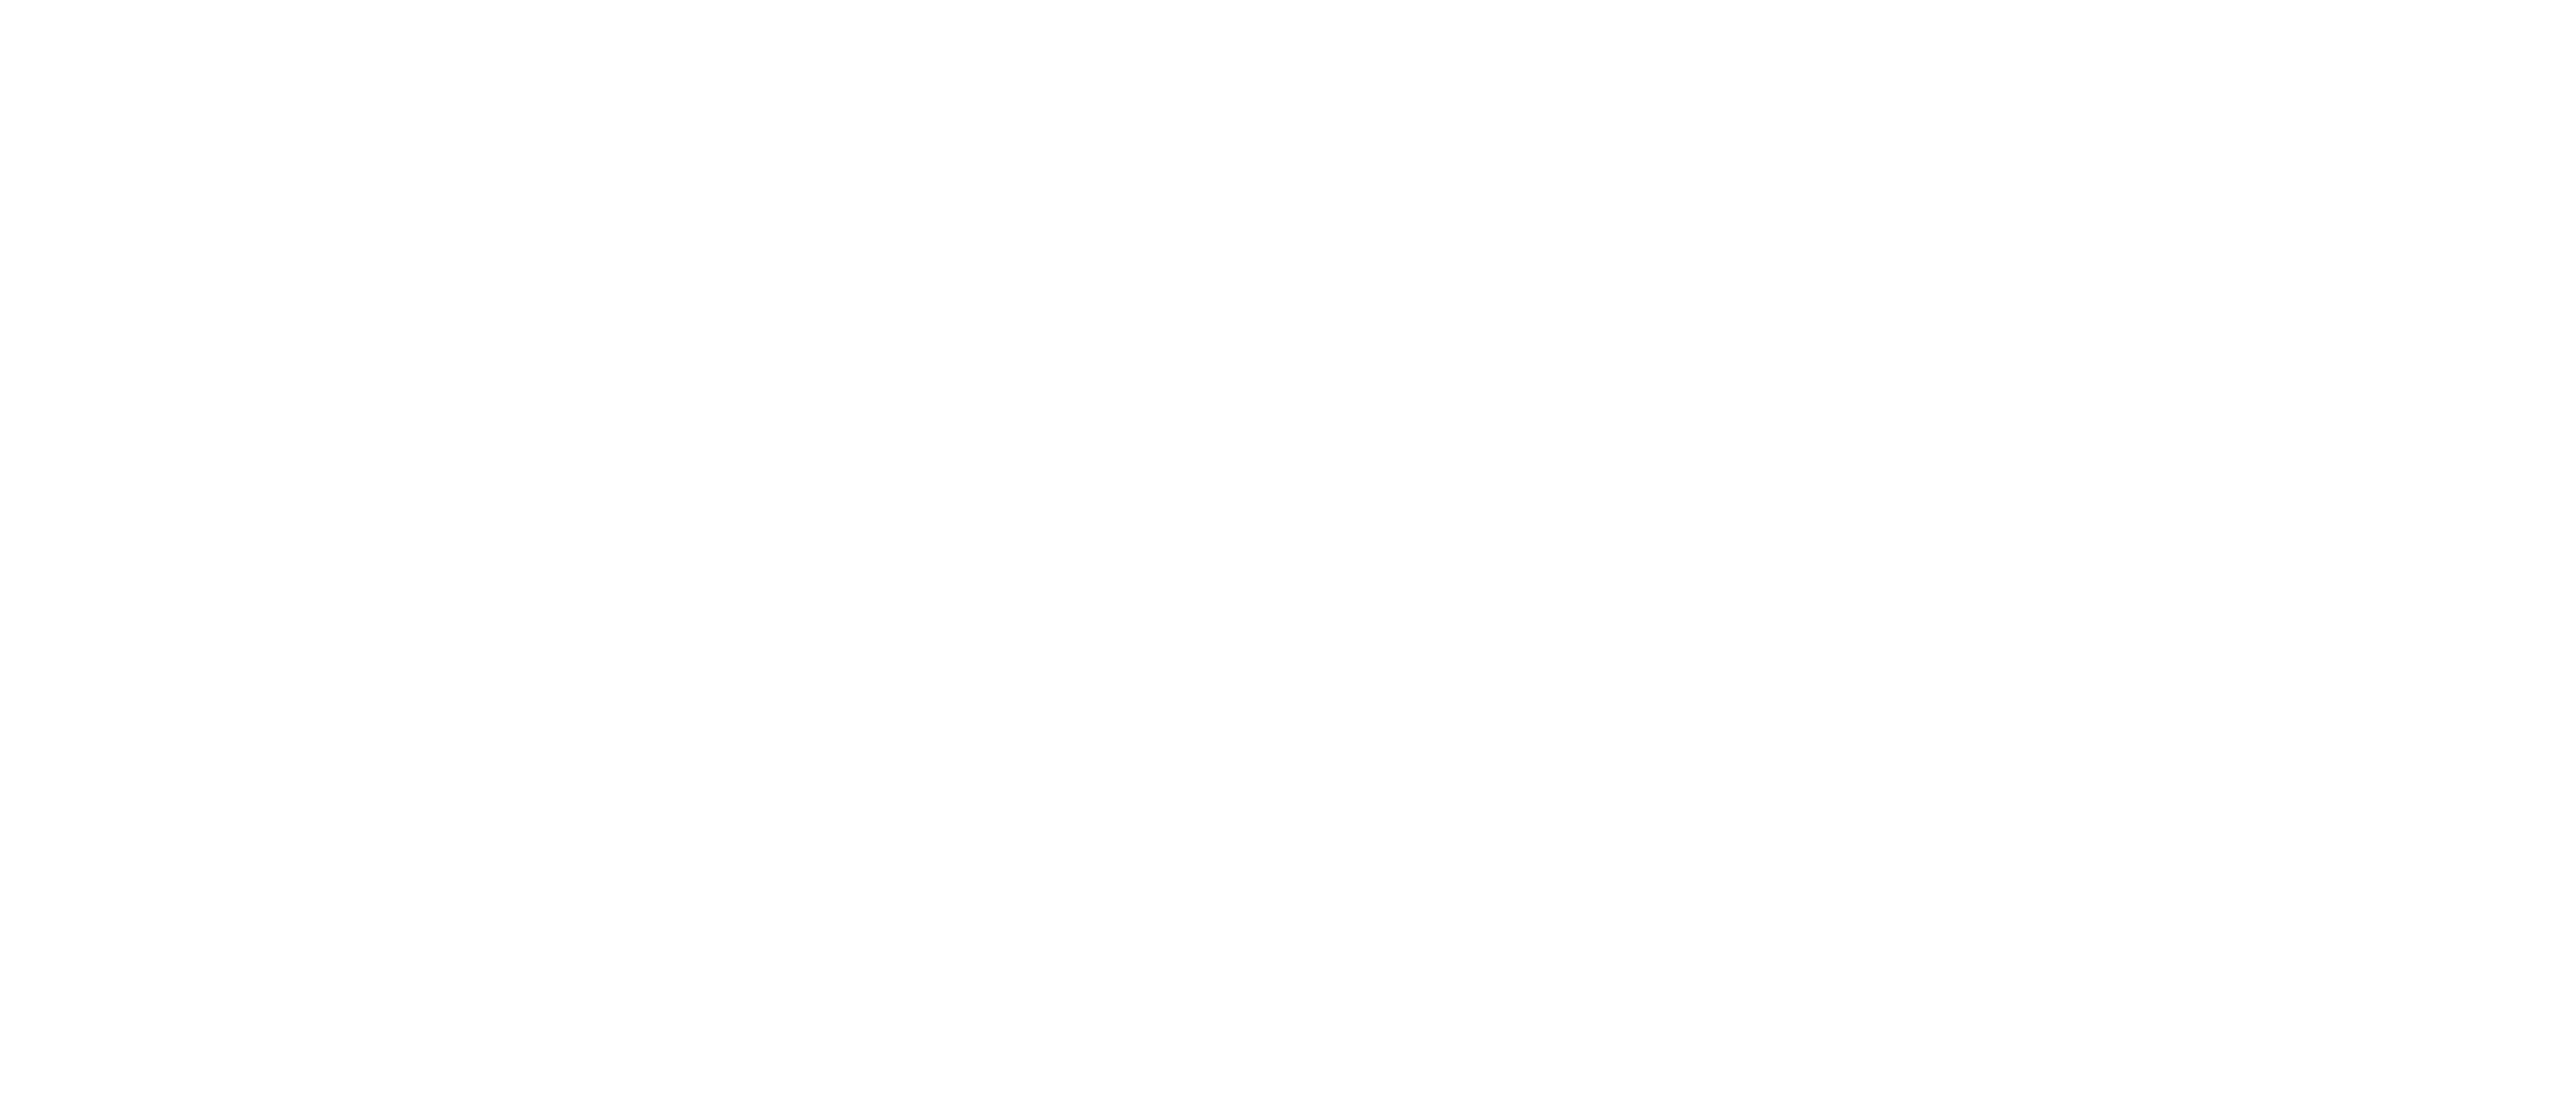 1% for the Planet Nonprofit Partner